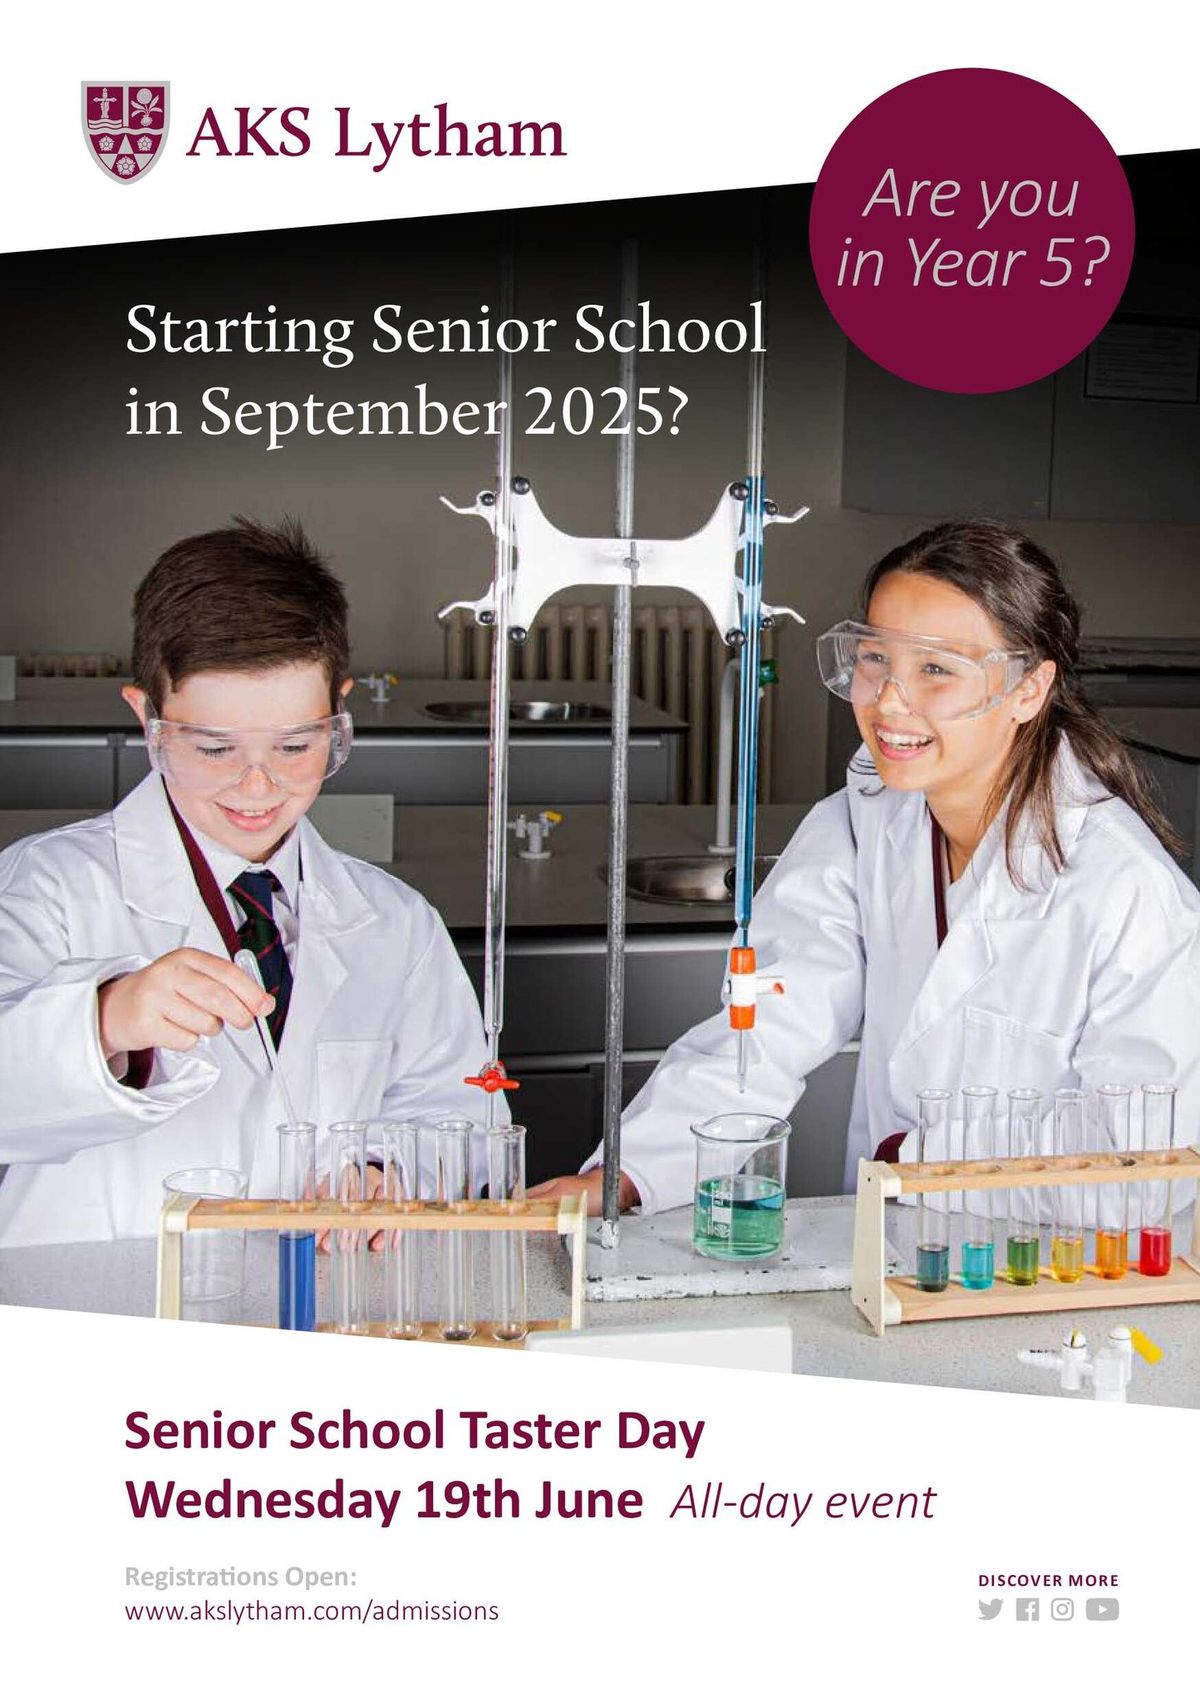 Senior School Taster Day - for Year 5 students